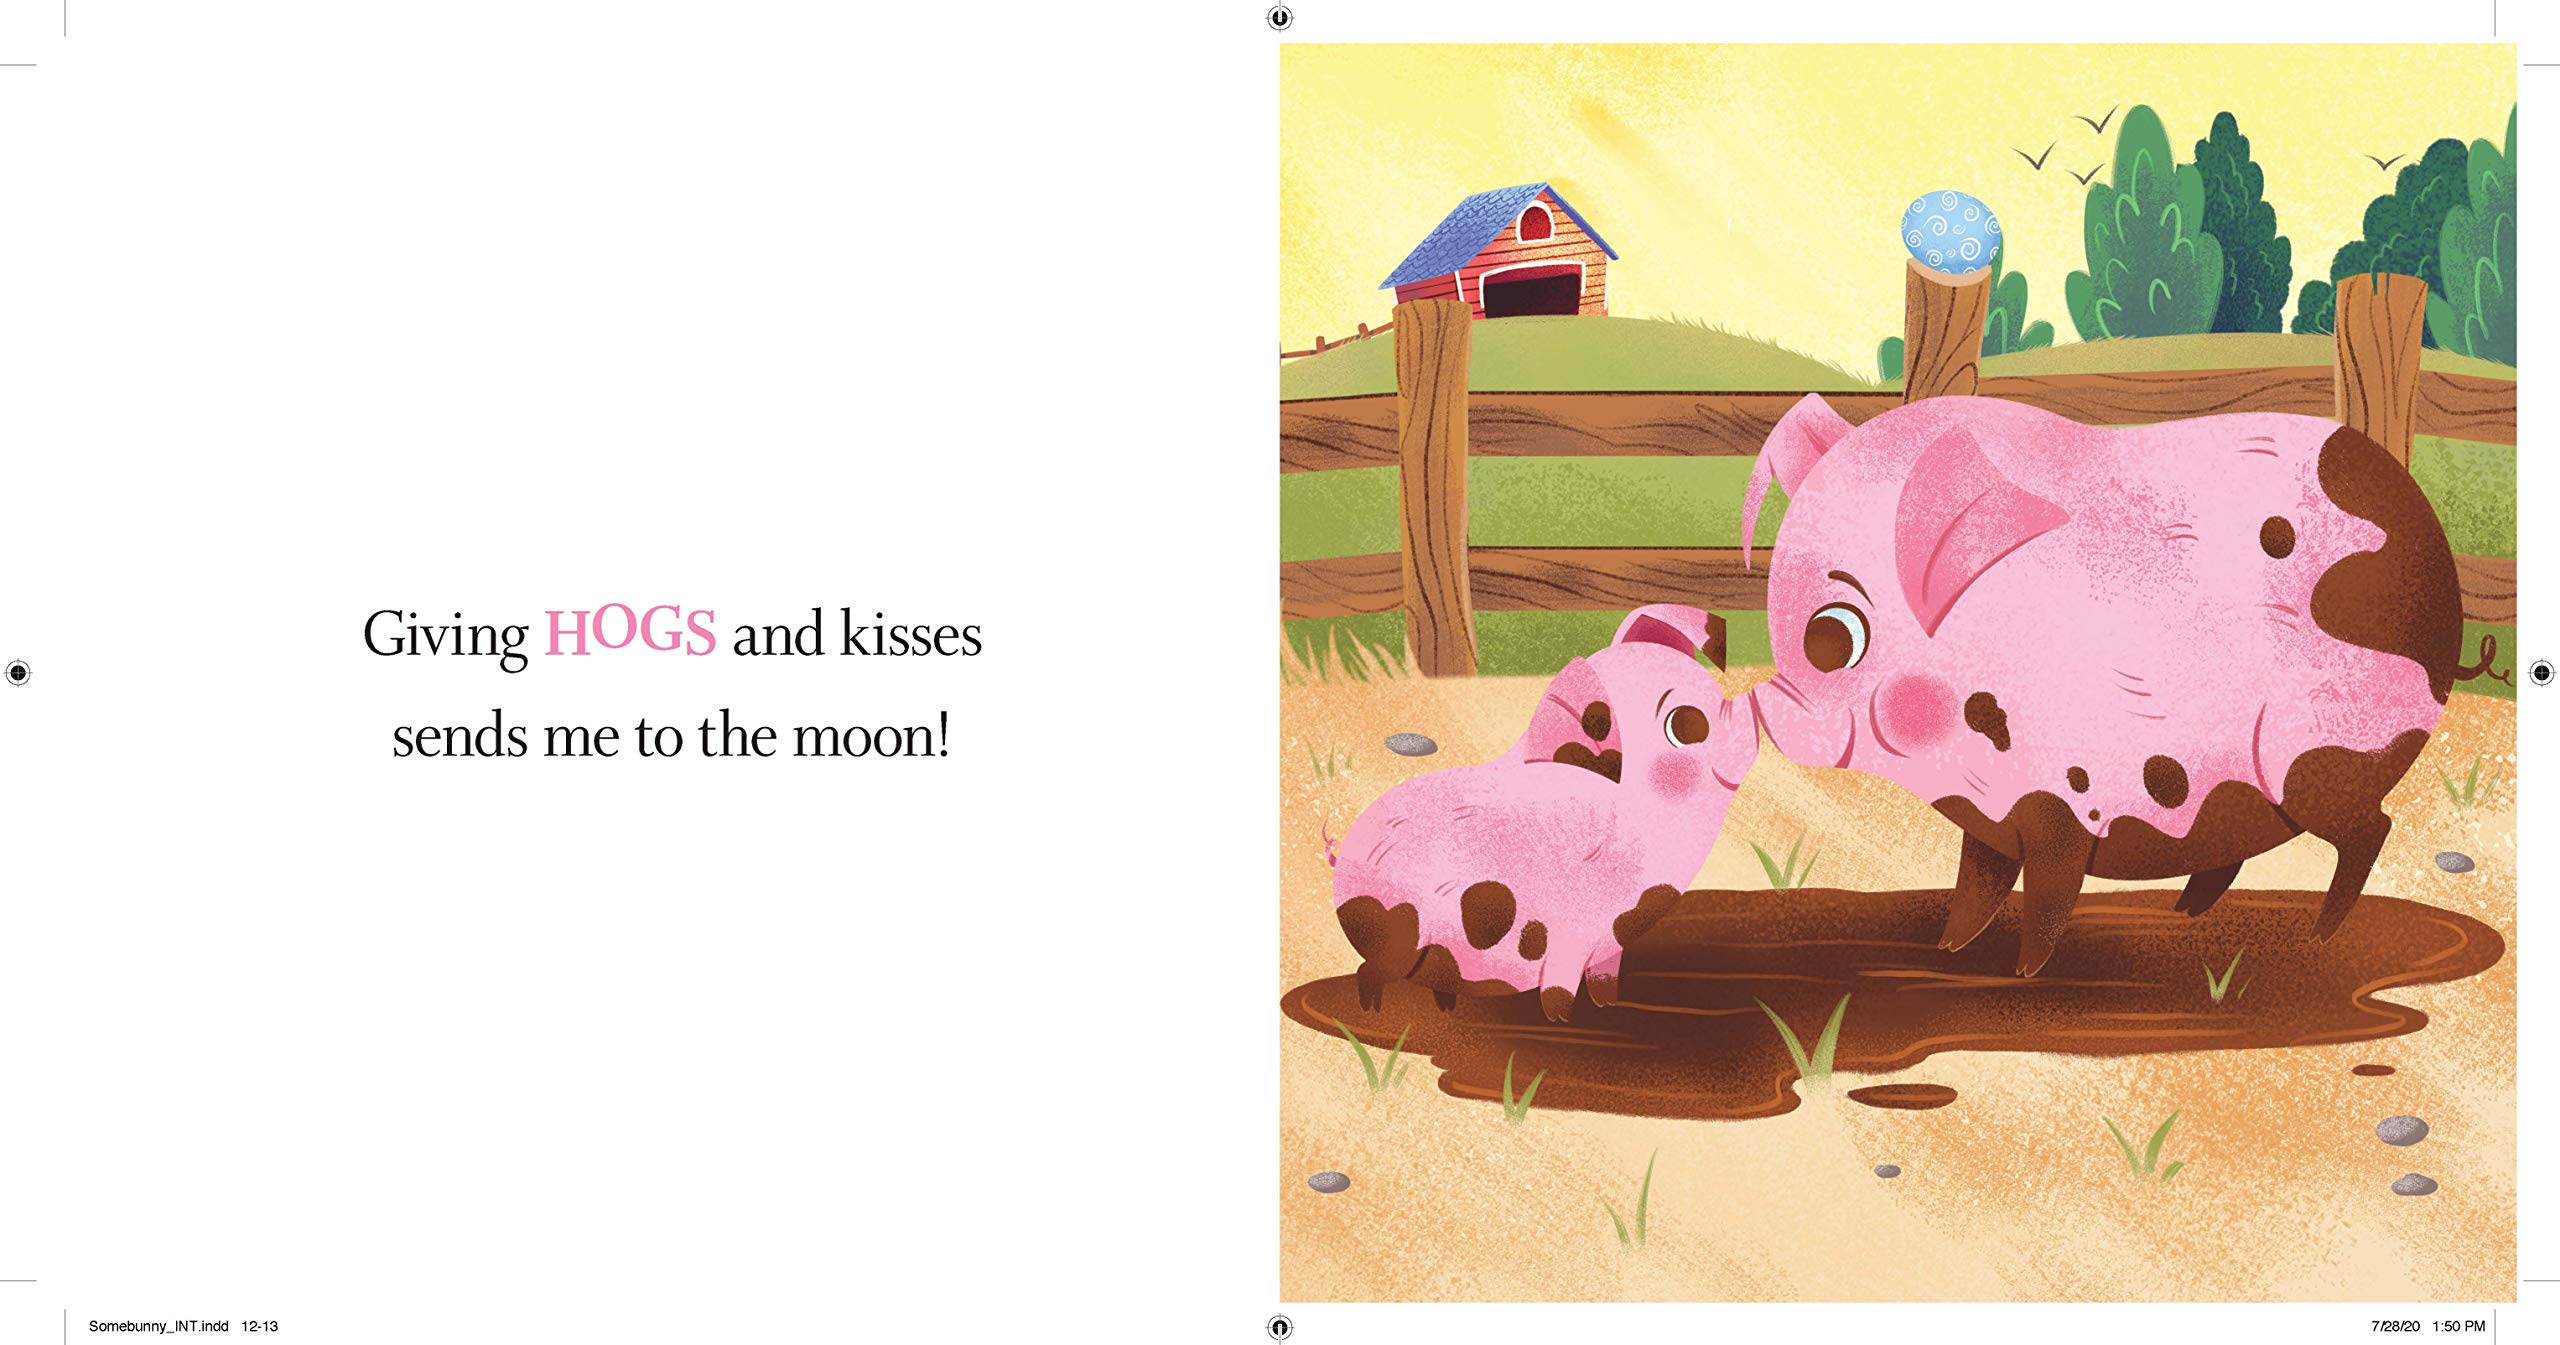 Somebunny Loves You: A Sweet and Silly Baby Animal Book for Toddlers (Punderland)